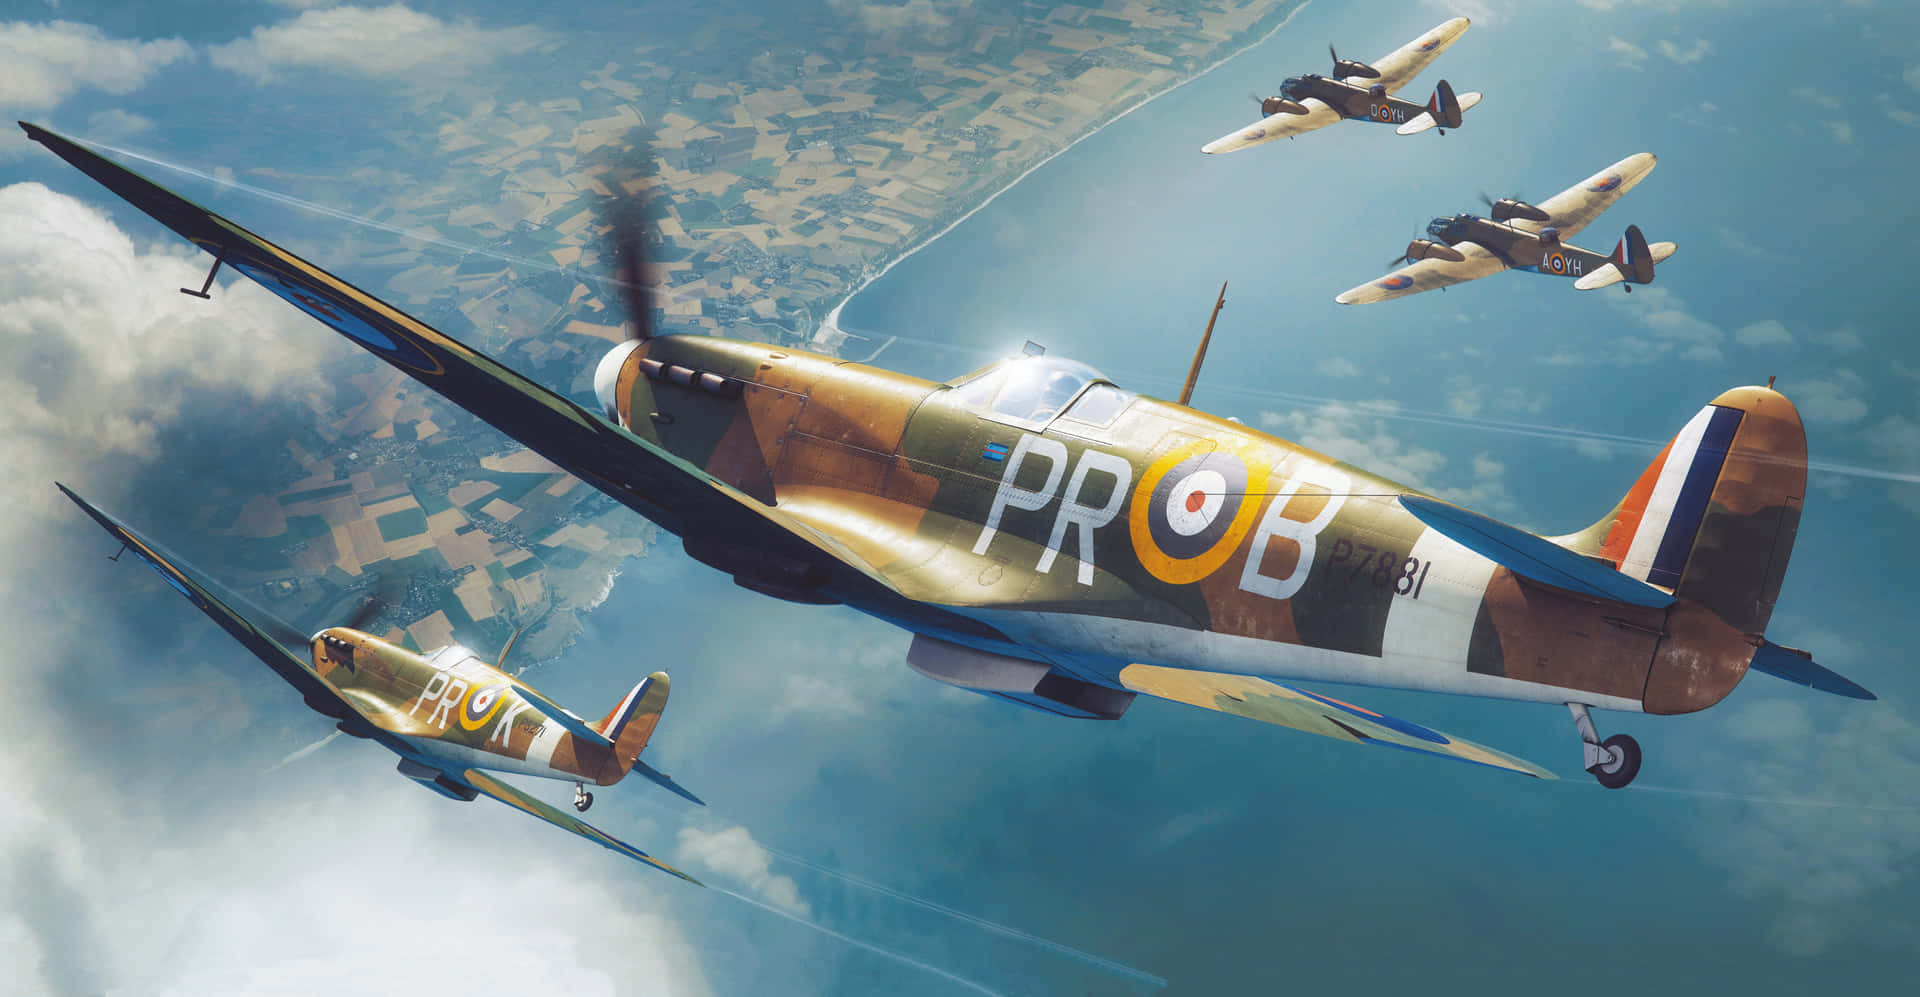 View of the iconic WWII British fighter, the Supermarine Spitfire Wallpaper